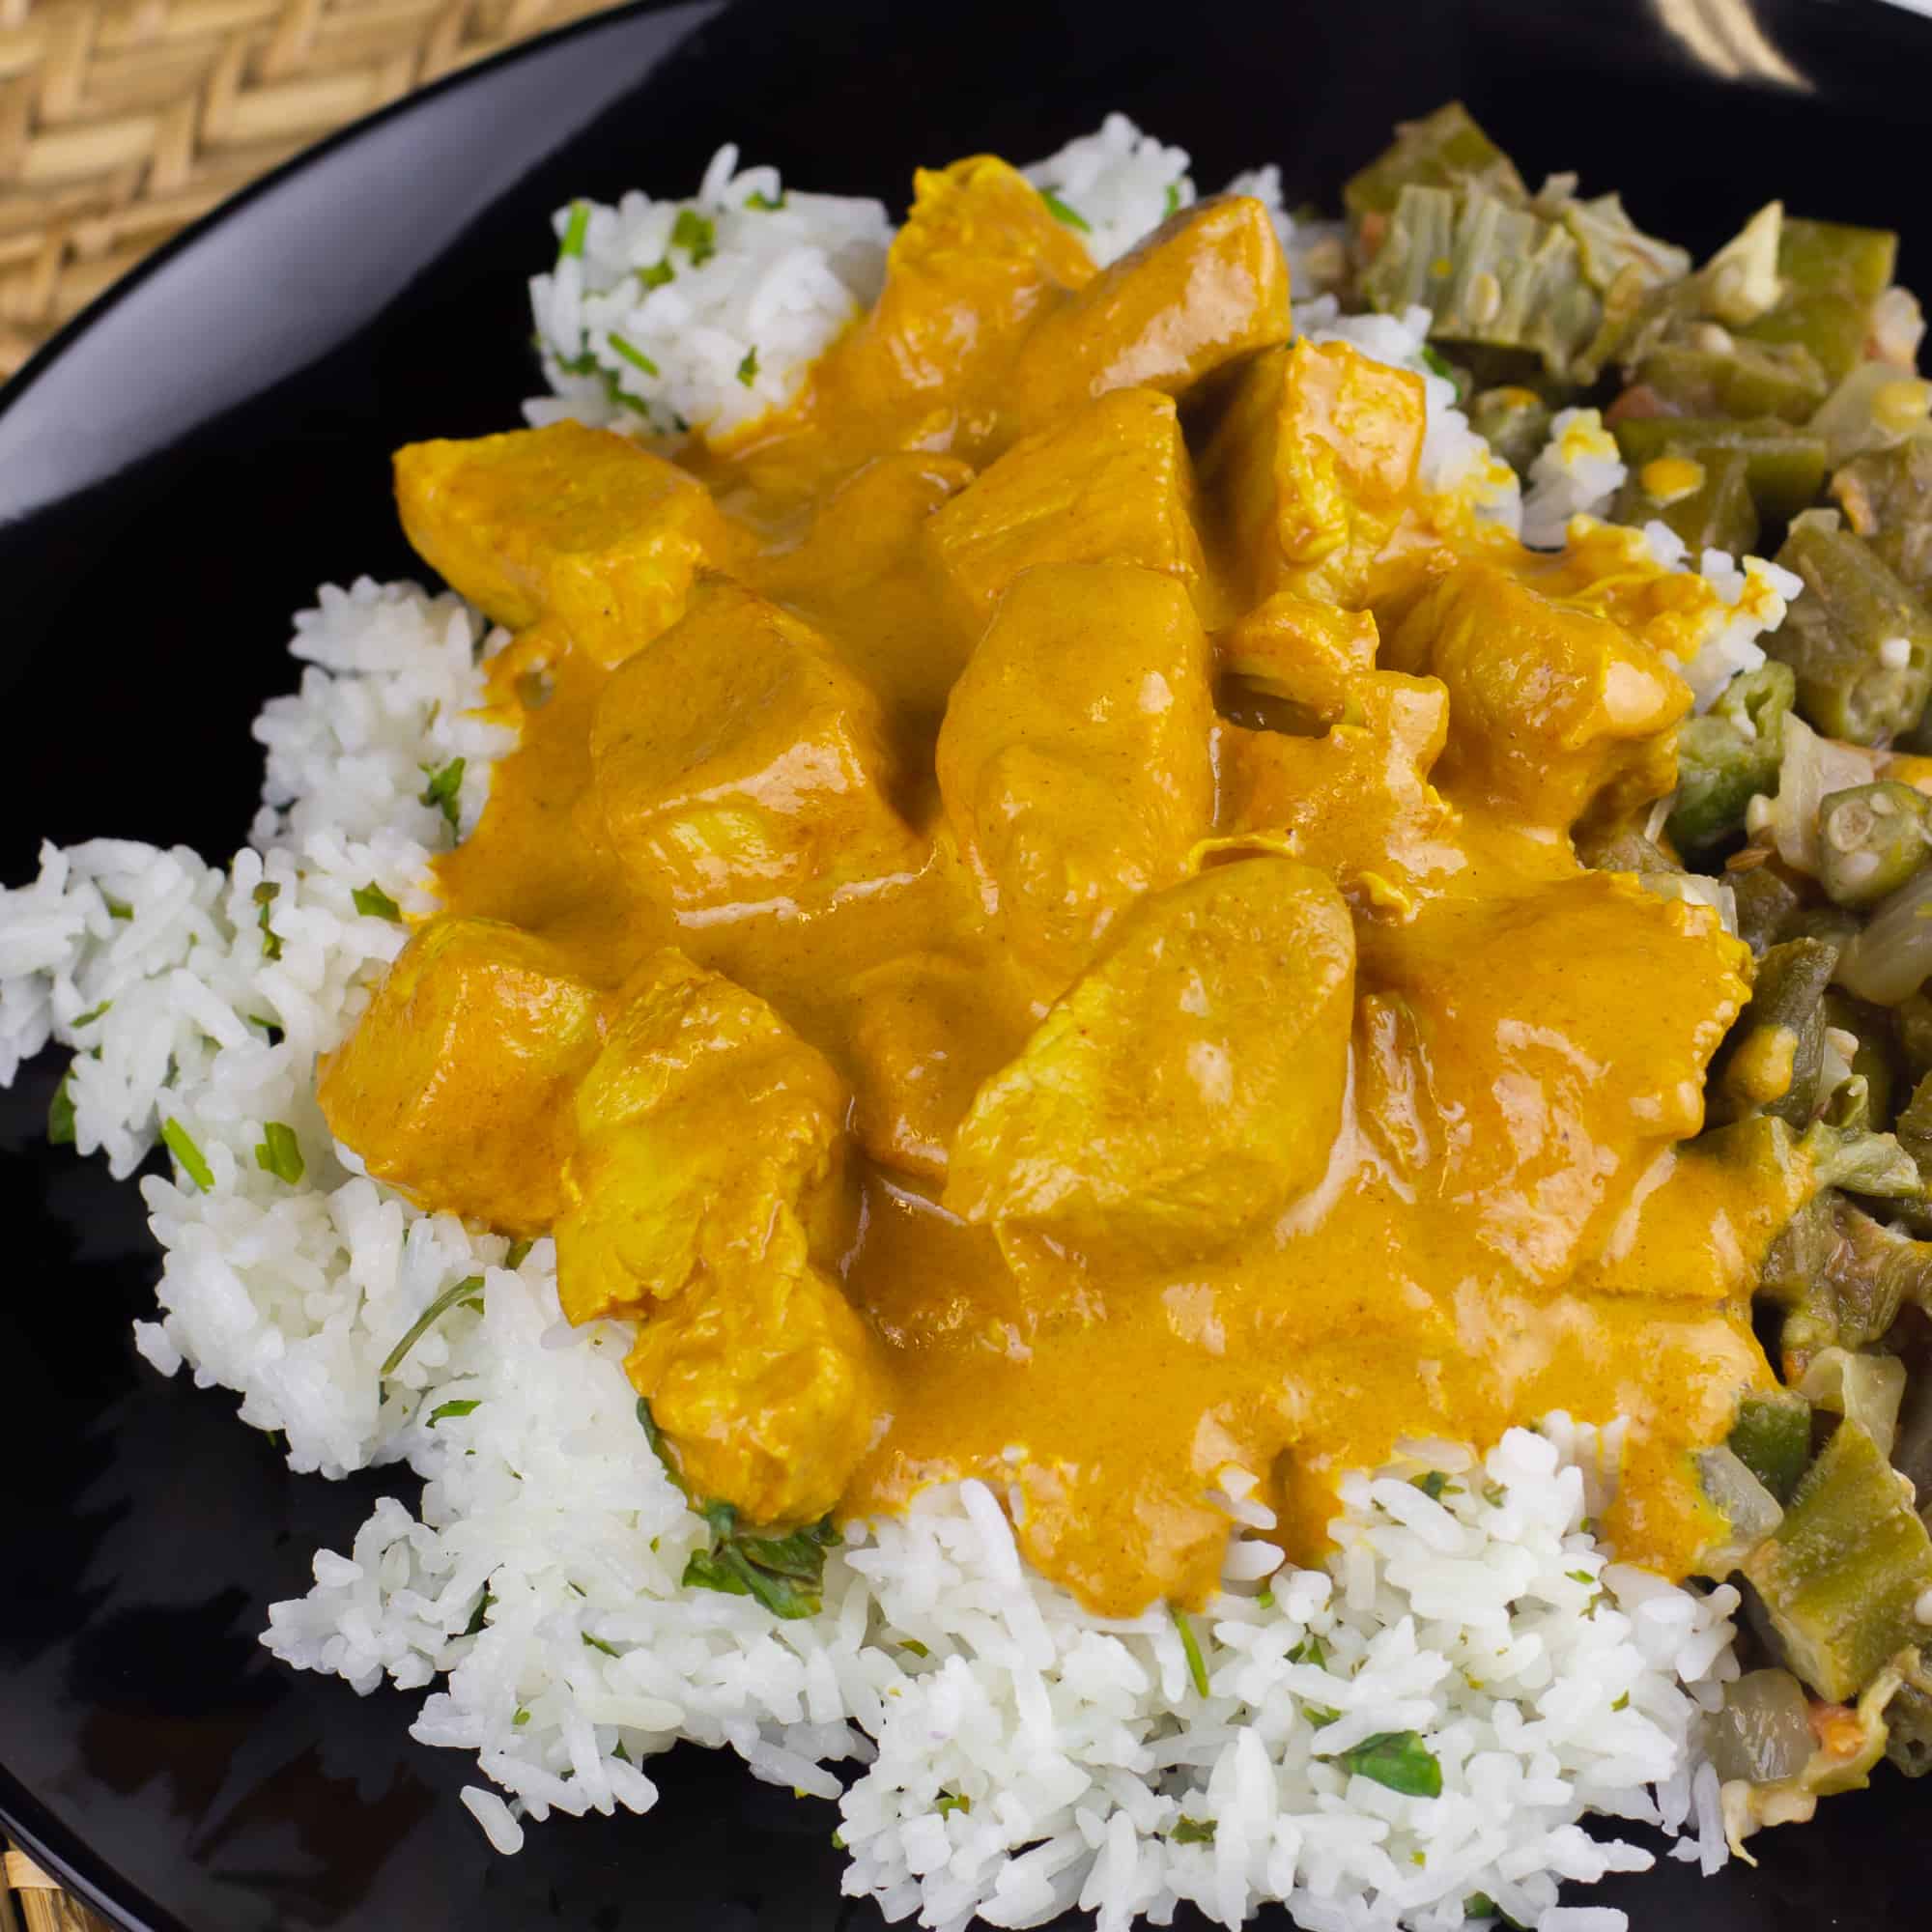 Crock Pot Chicken Tikka Masala recipe that is creamy and mild Indian curry (like butter chicken). Make in the slow cooker and serve on rice. 